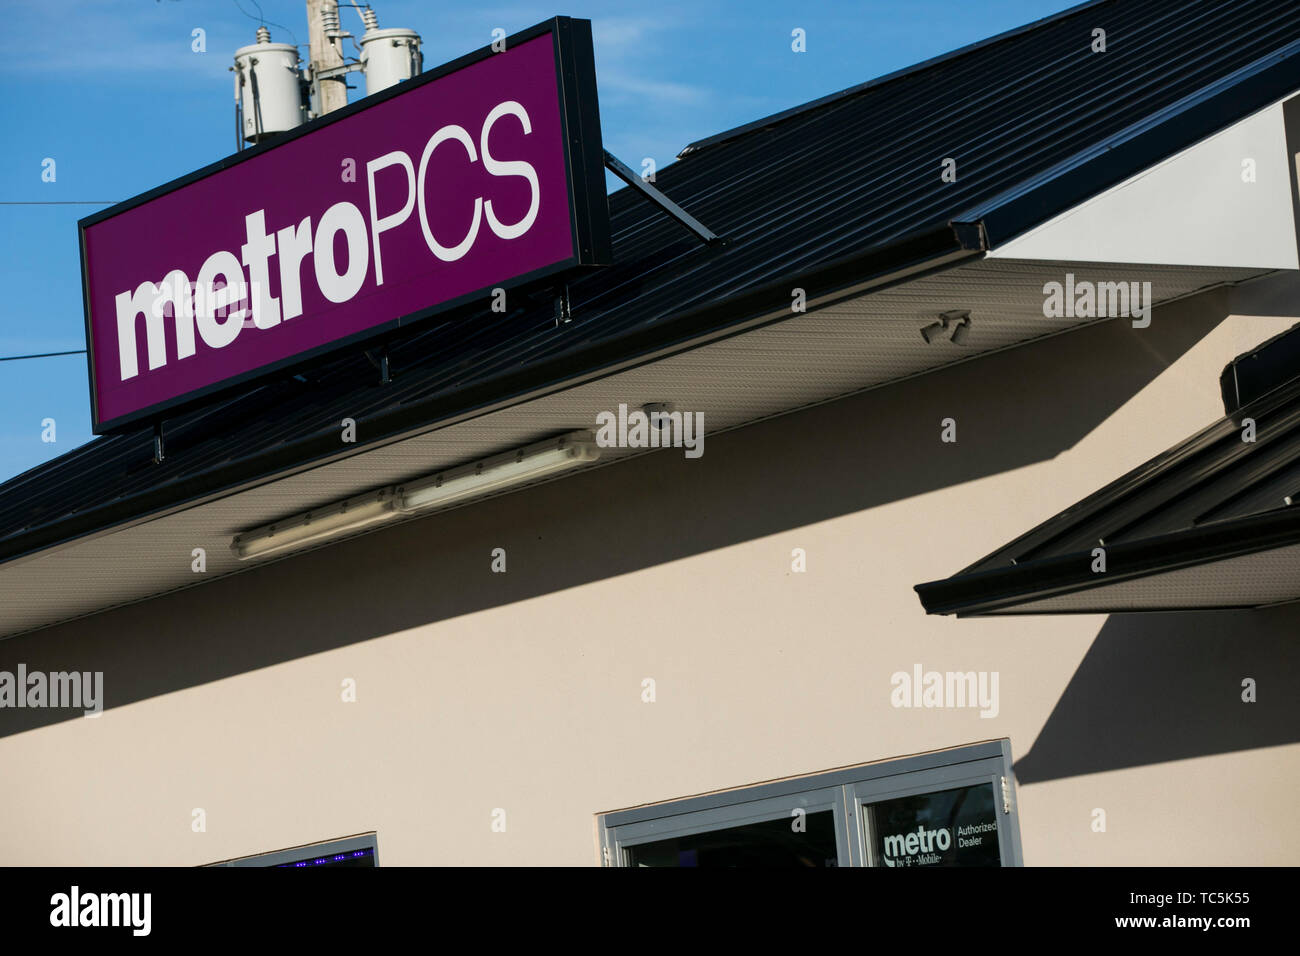 A logo sign outside of a MetroPCS Communications retail store location in Martinsburg, West Virginia on June 4, 2019. Stock Photo